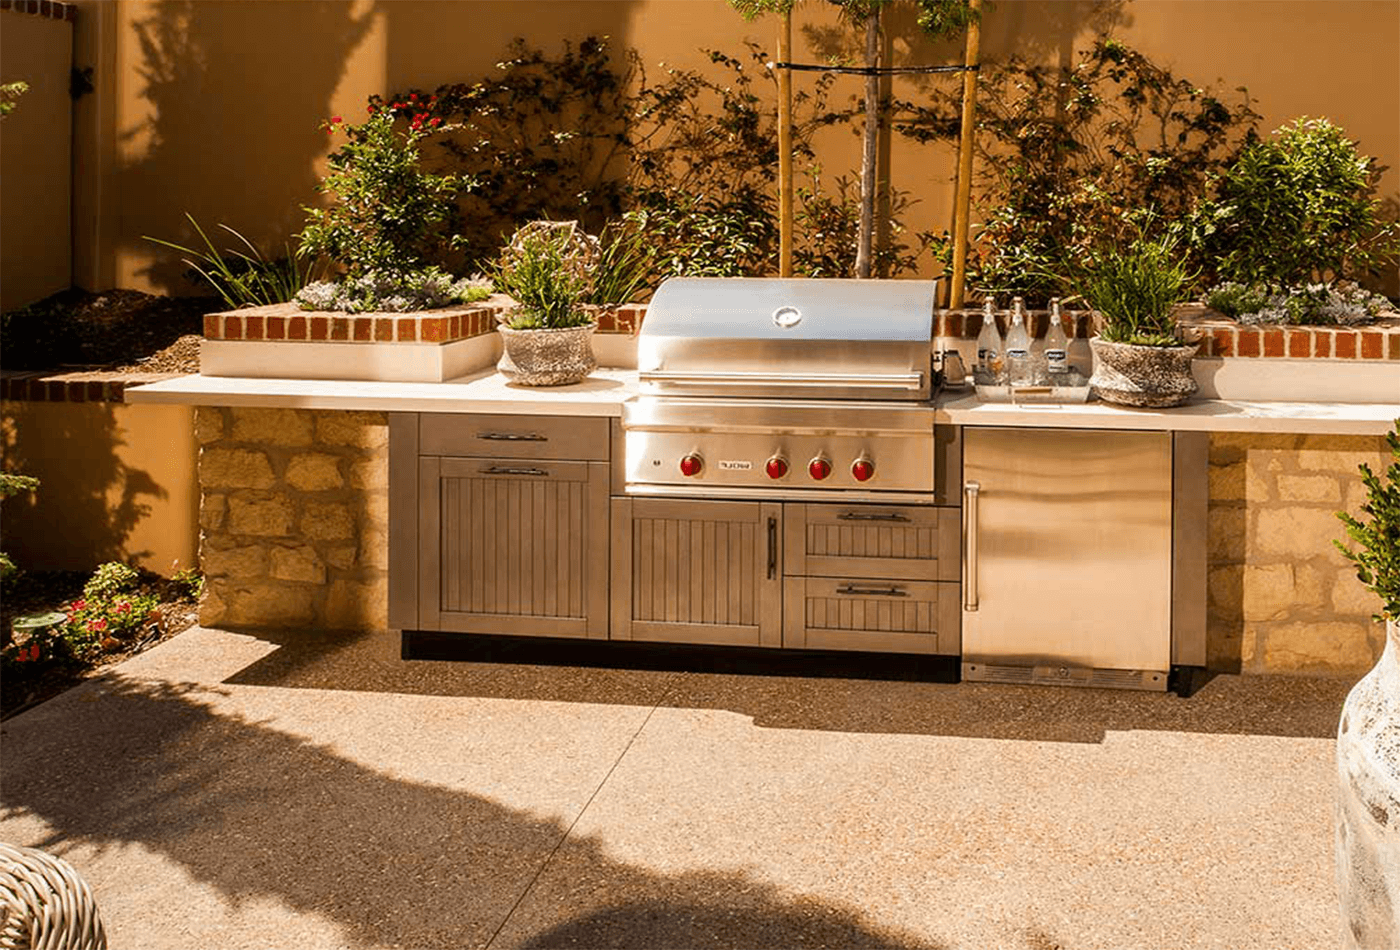 How Do I Build an Outdoor Kitchen on a Budget?